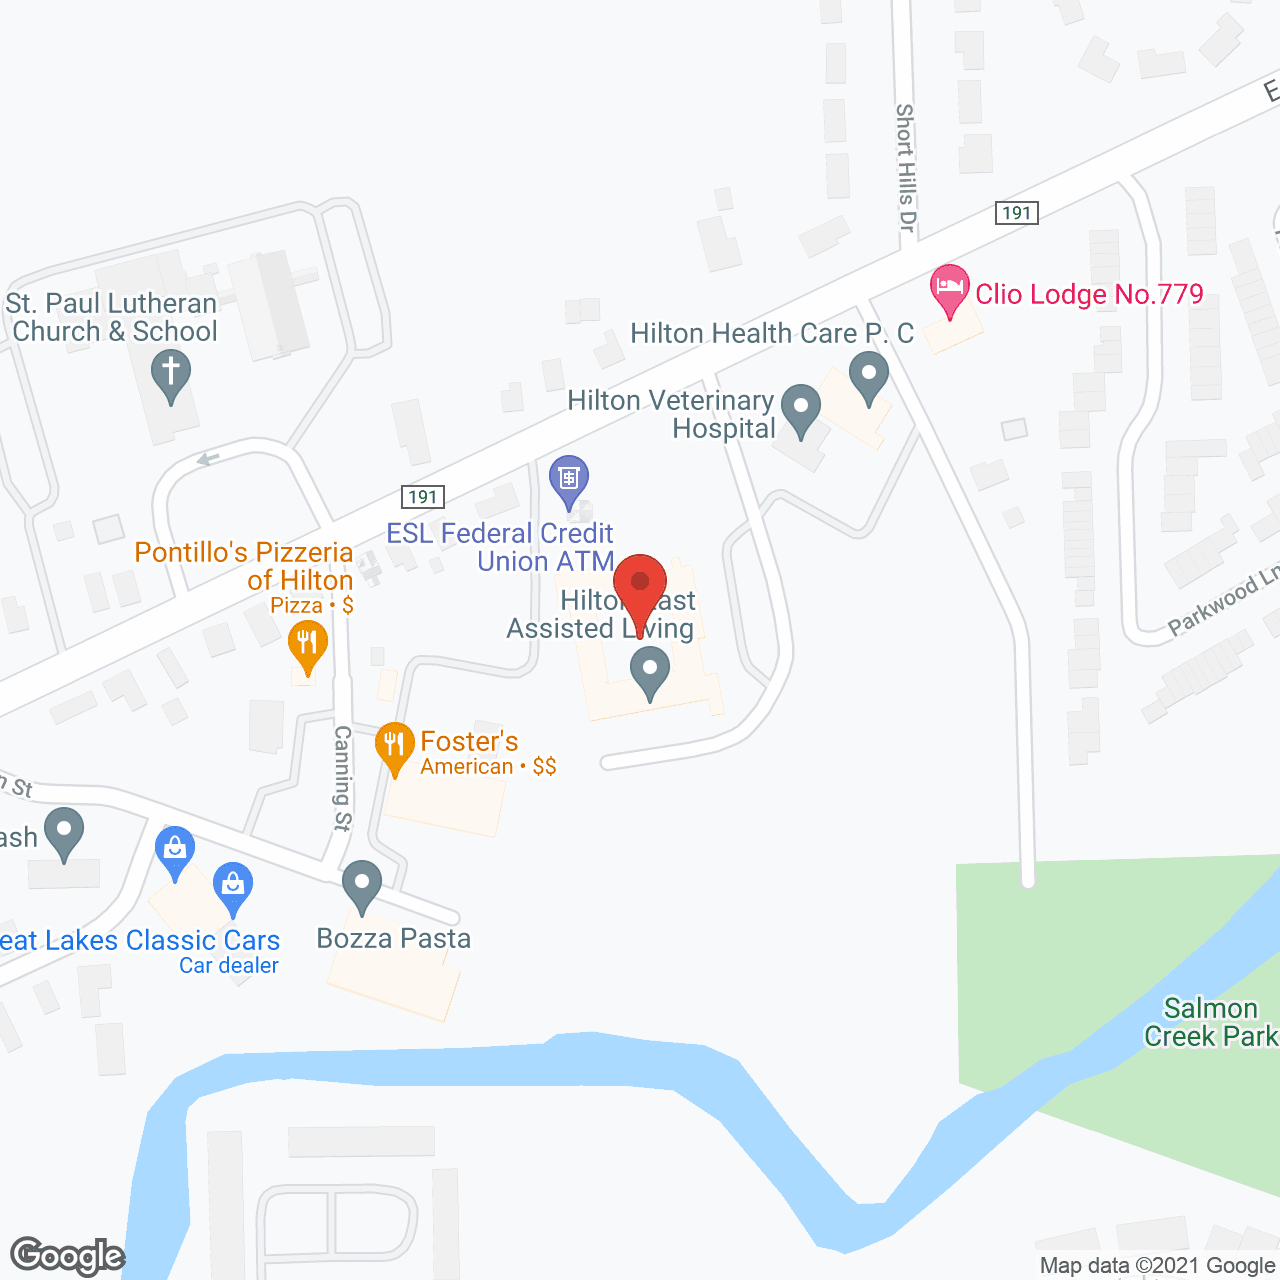 Hilton East Assisted Living in google map